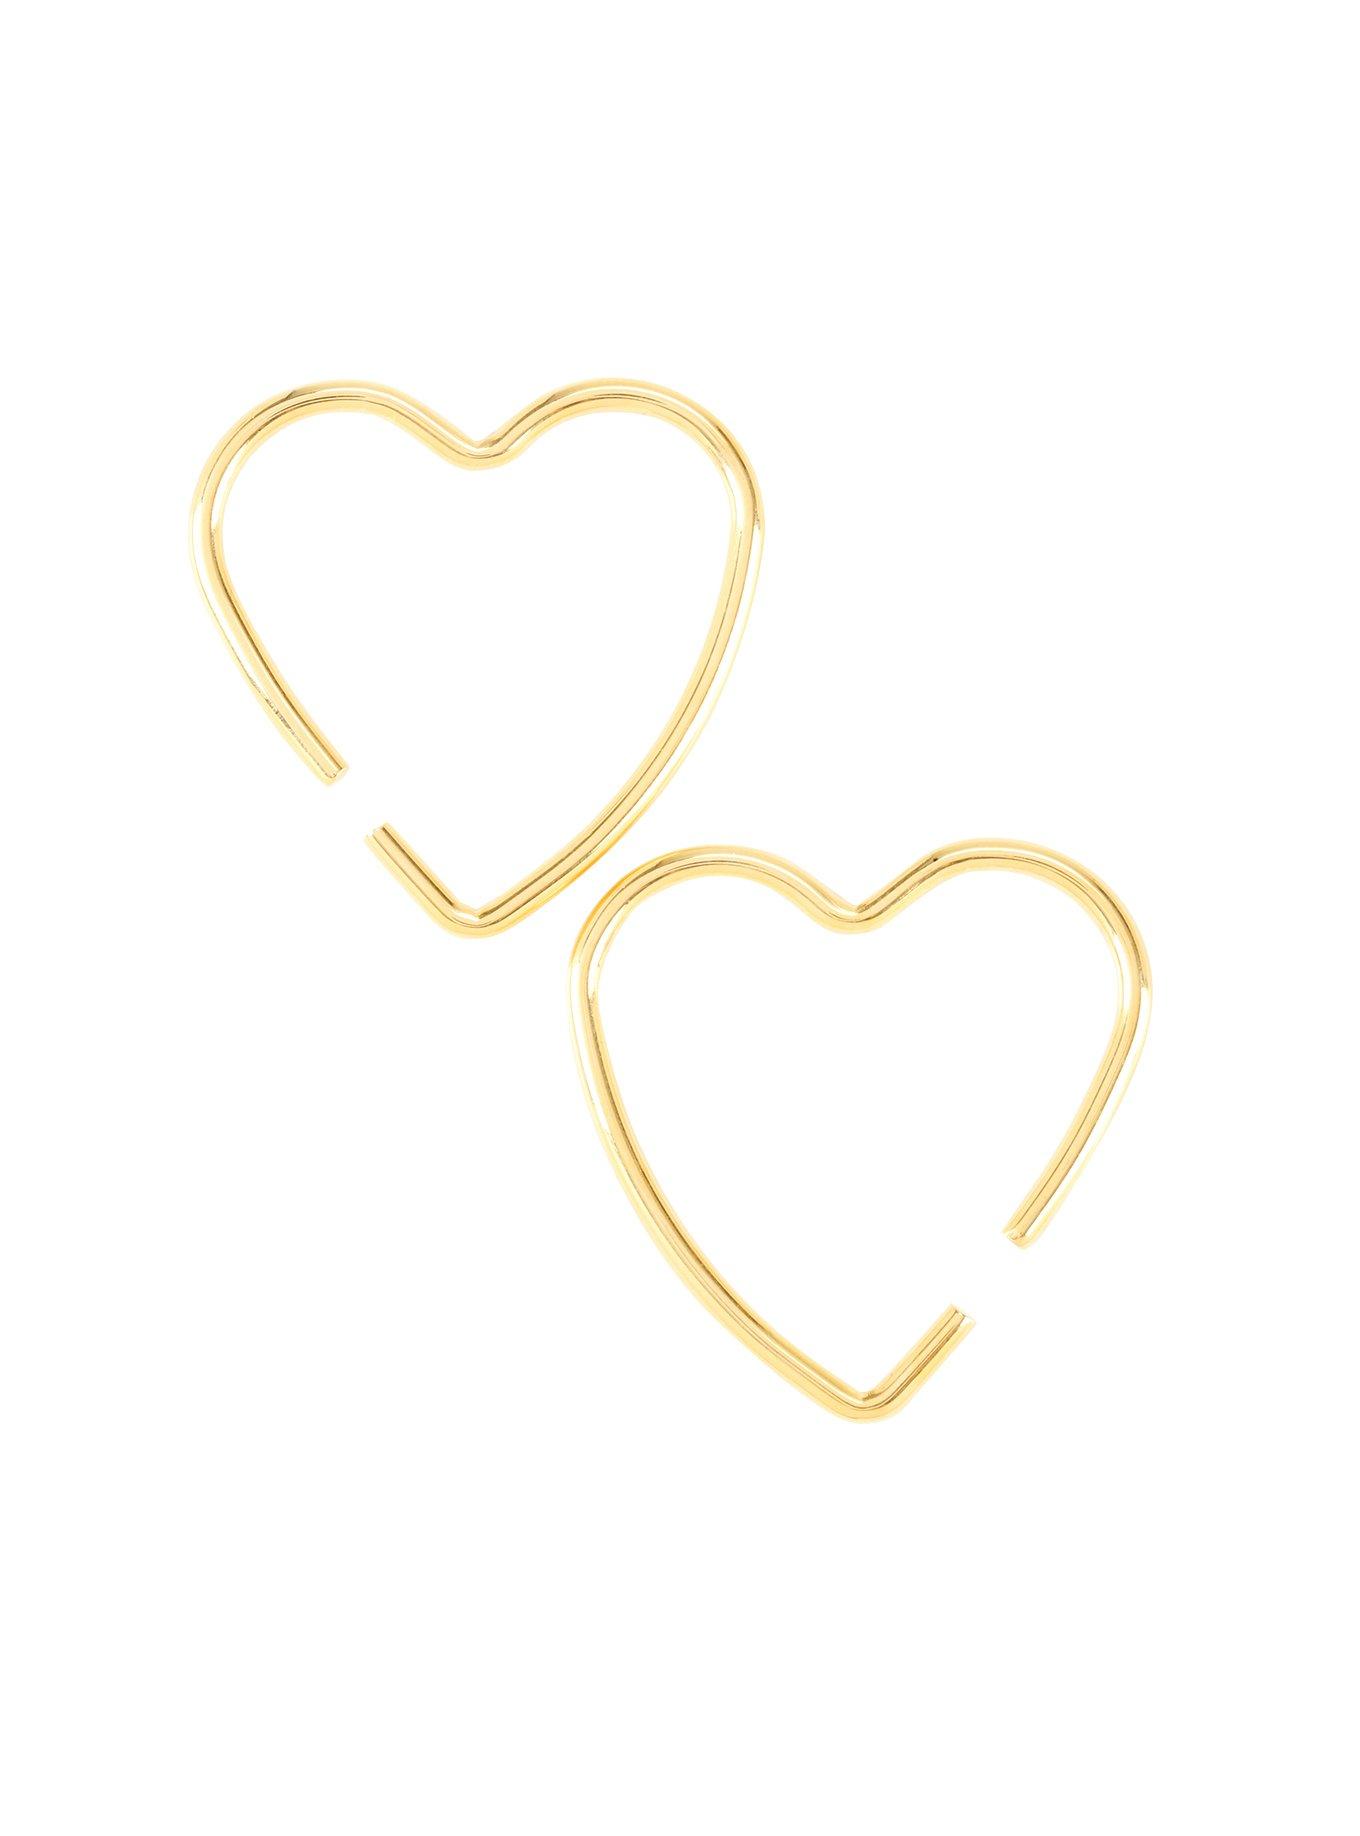 Steel Gold Heart-Shaped Pincher 2 Pack, MULTI, hi-res